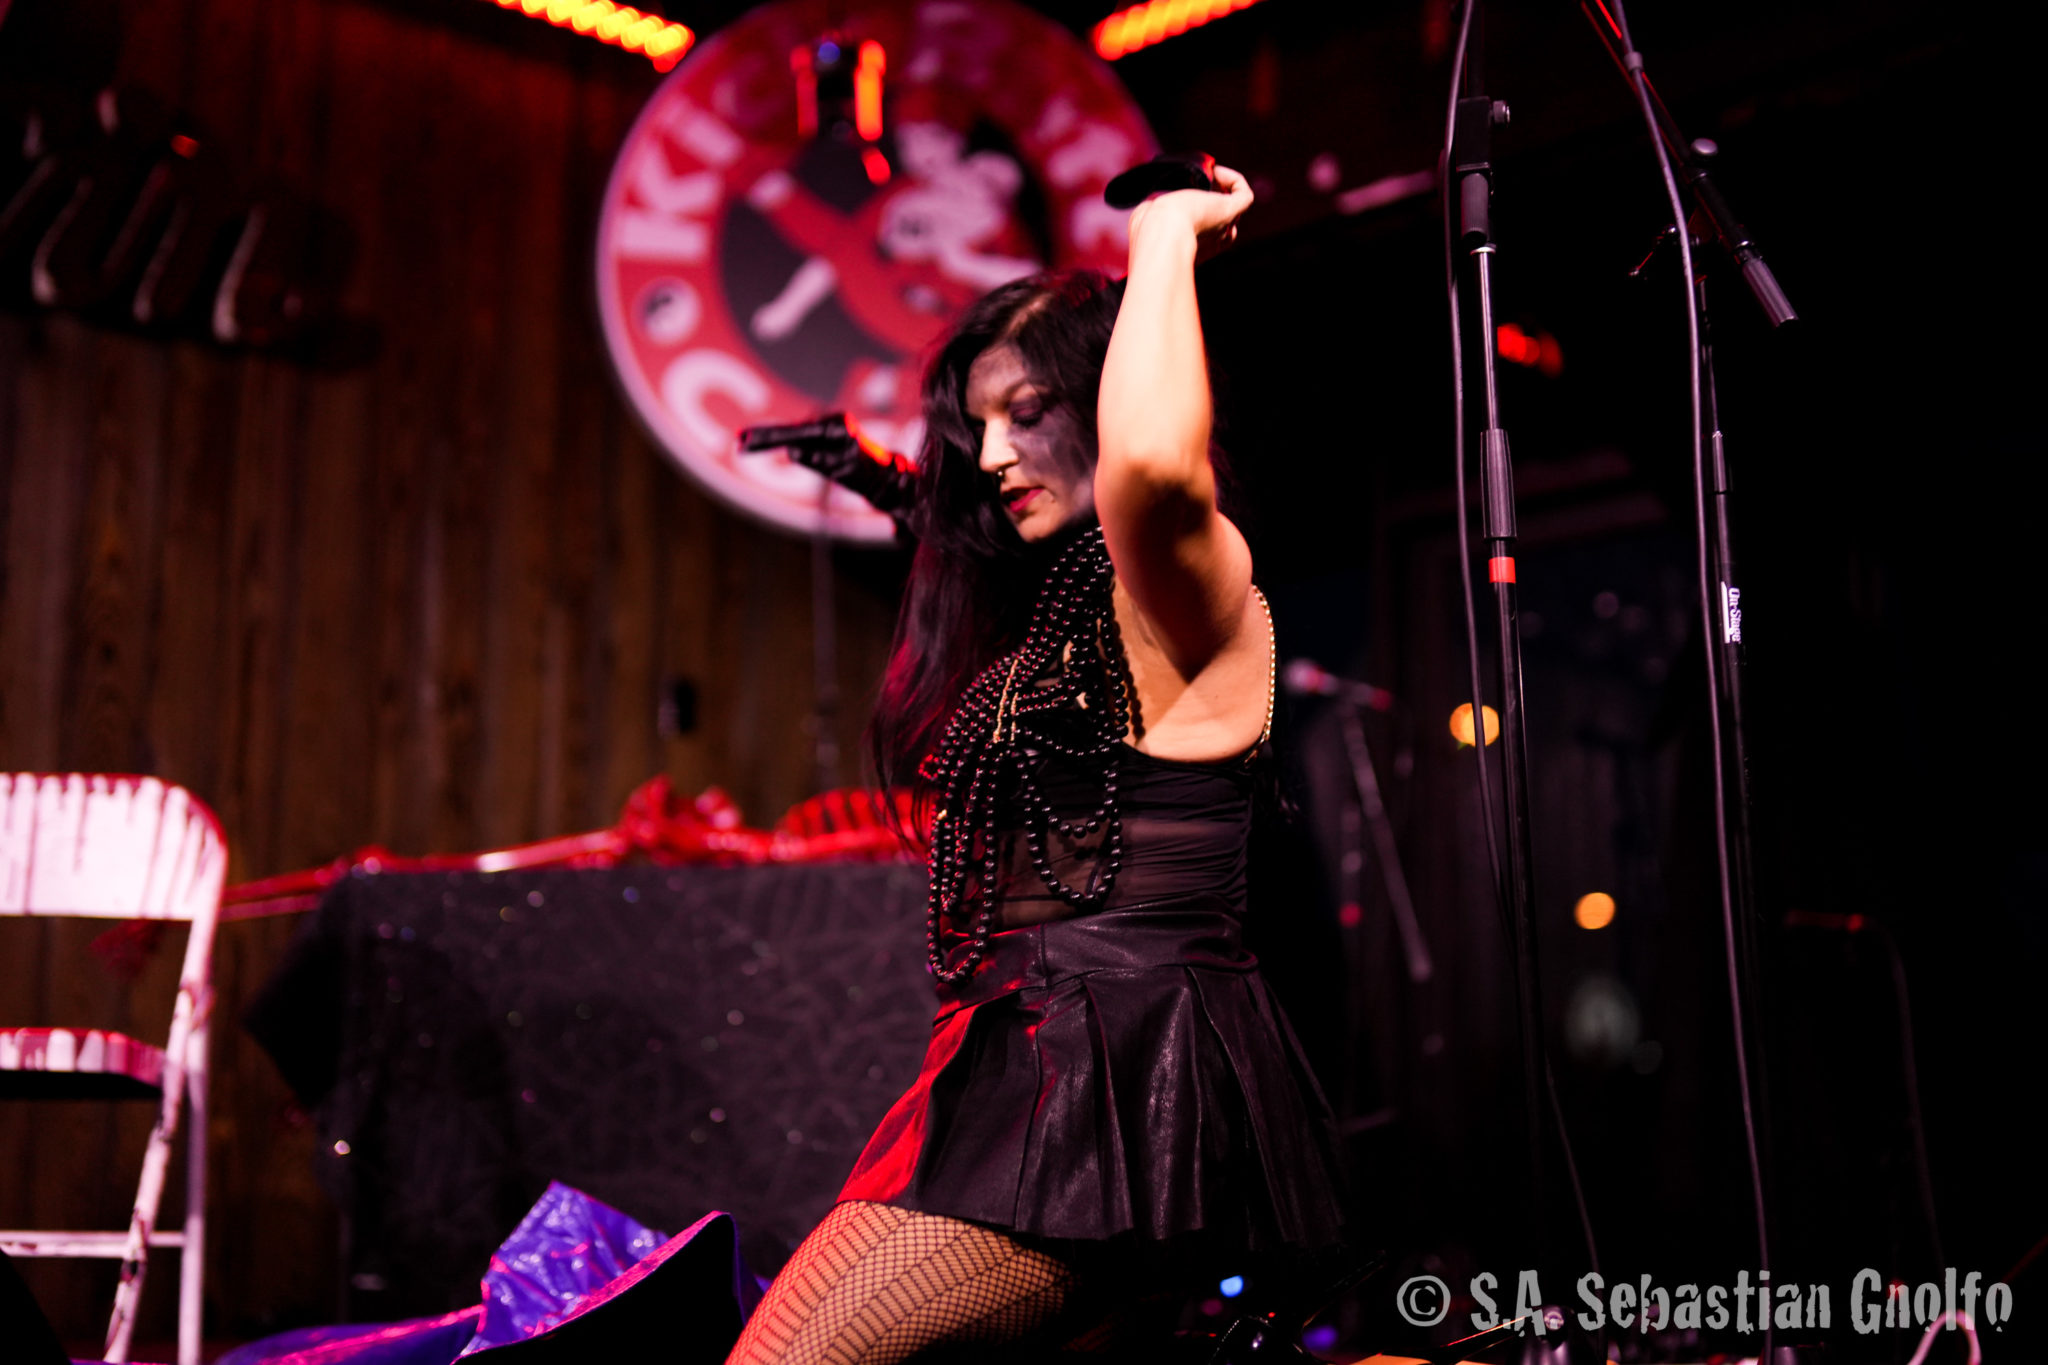 Lindsay LaPerle at Gore Noir Magazine's 11th Anniversary Party